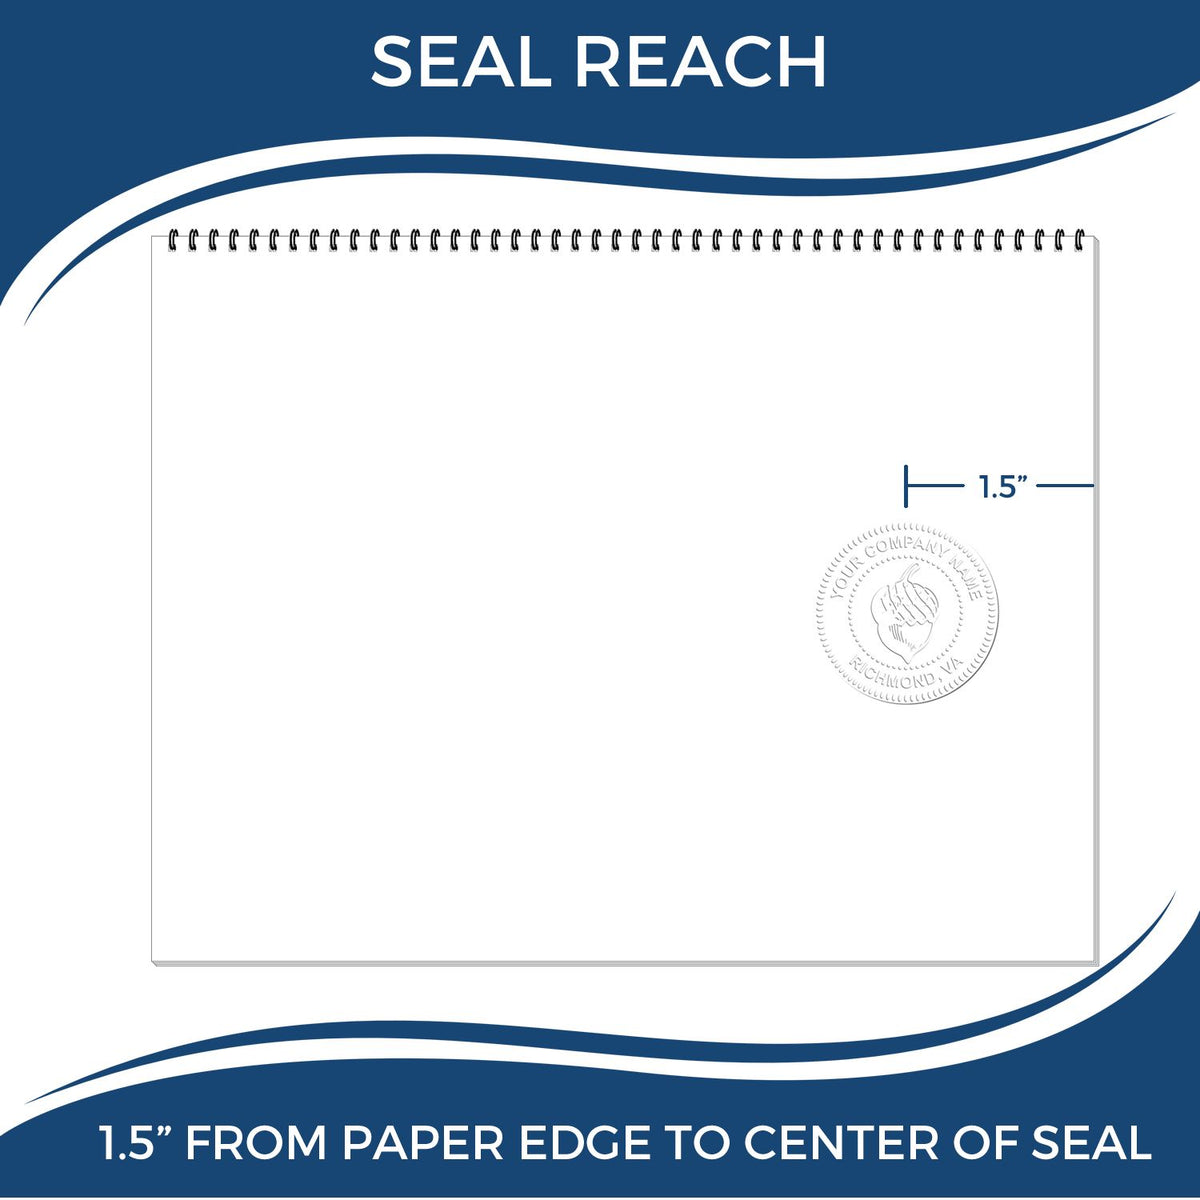 An infographic showing the seal reach which is represented by a ruler and a miniature seal image of the Hybrid Idaho Architect Seal